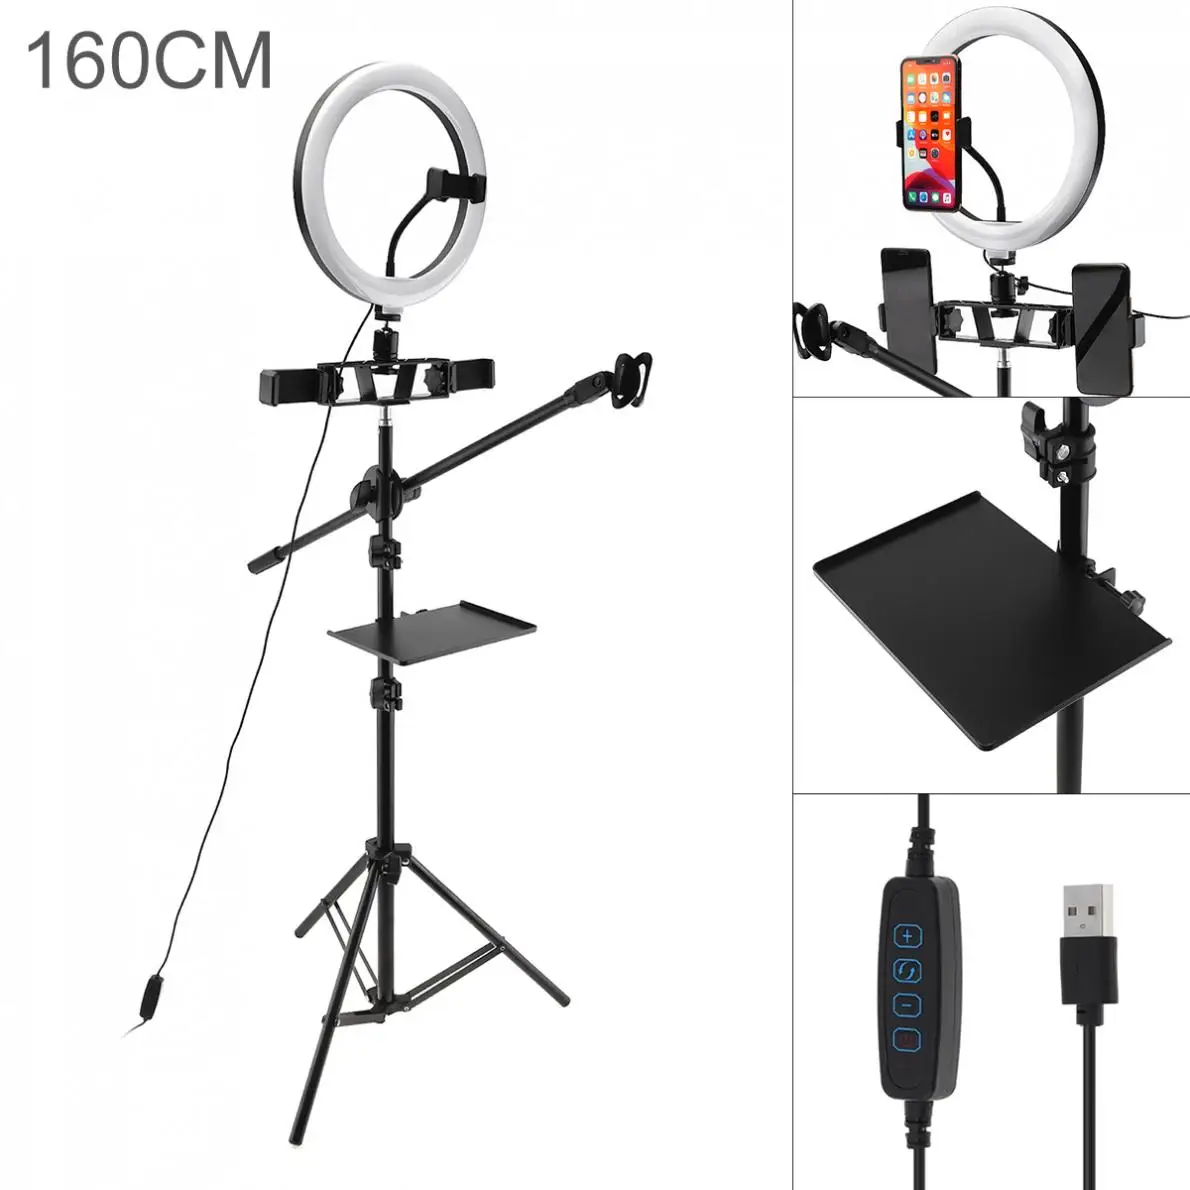 26cm LED Selfie Ring Light With Tripod RingLight with Mobile Phone Clips & Microphone Stand for Makeup Video Live Photo